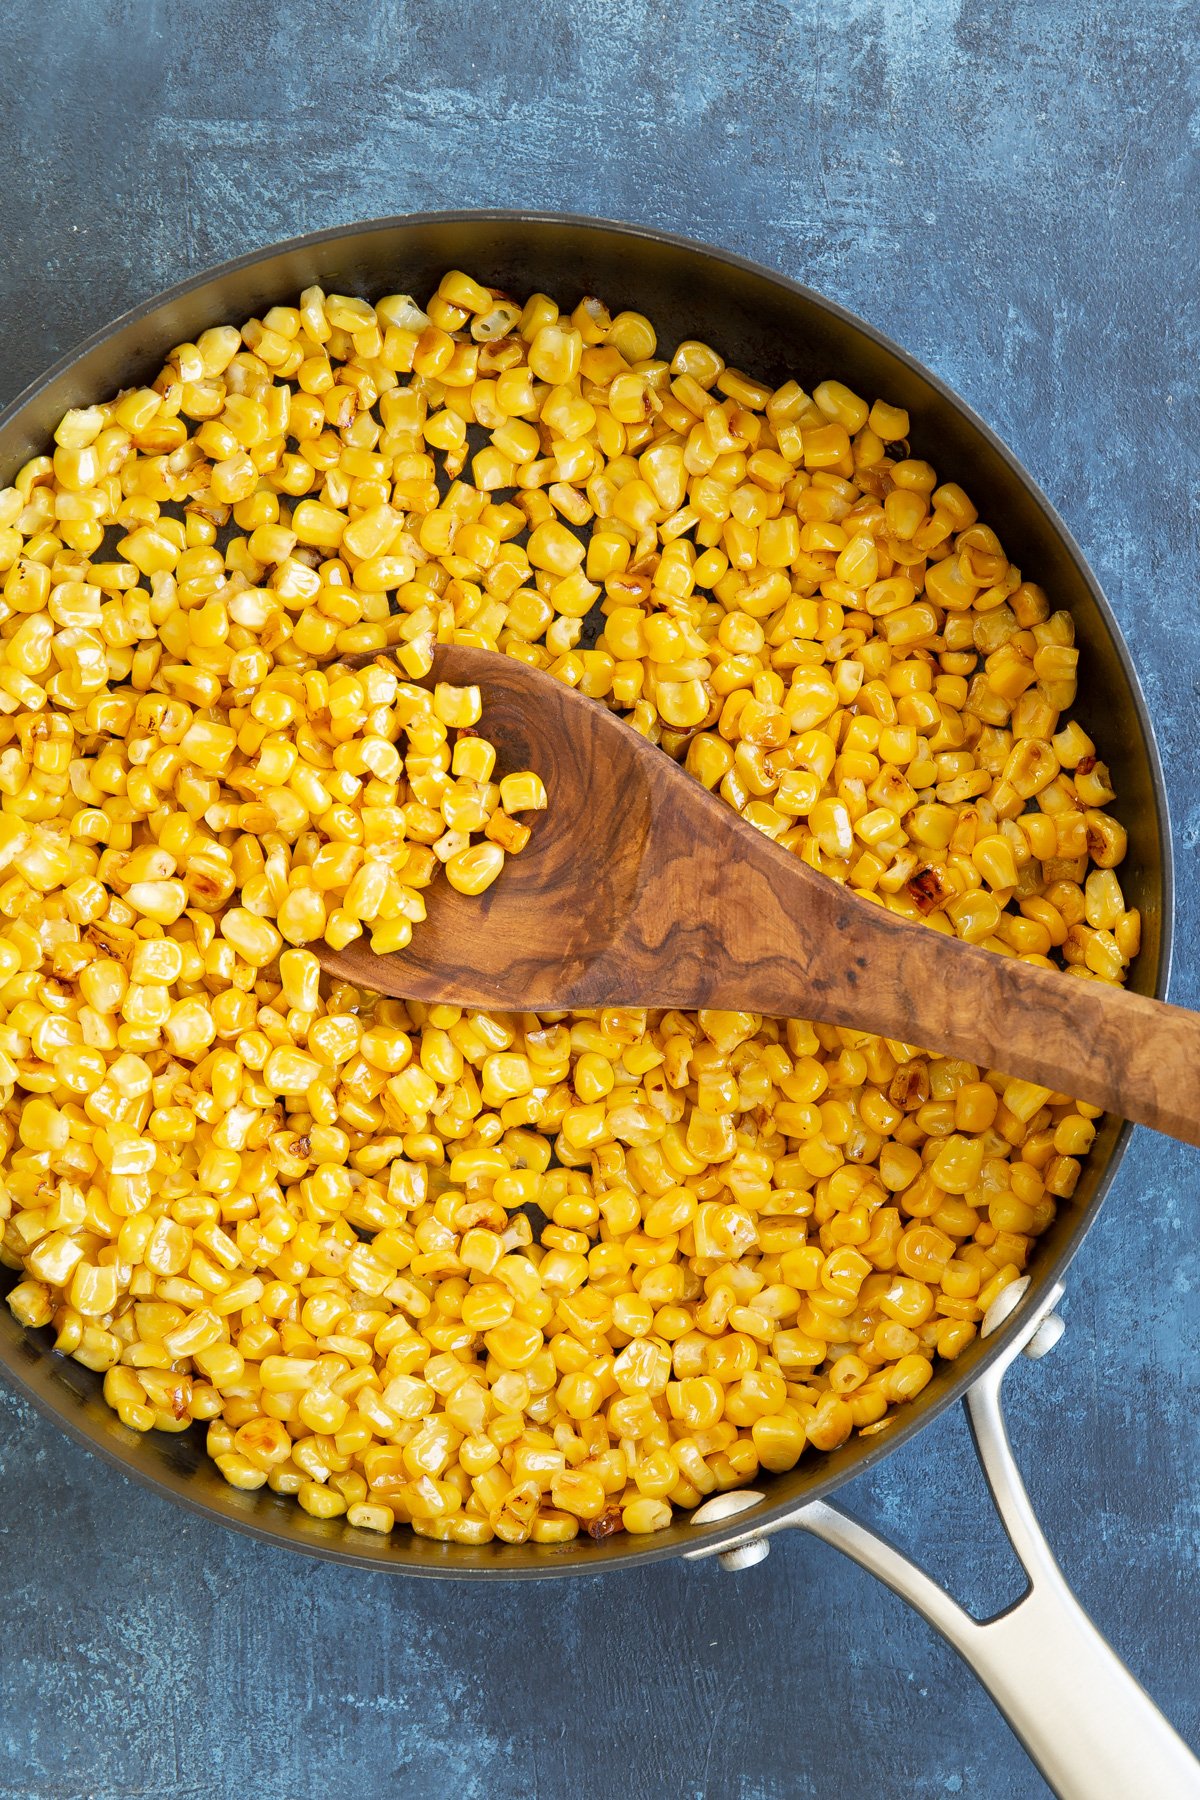 Overhead view of cooked yellow corn kernels in a skillet.